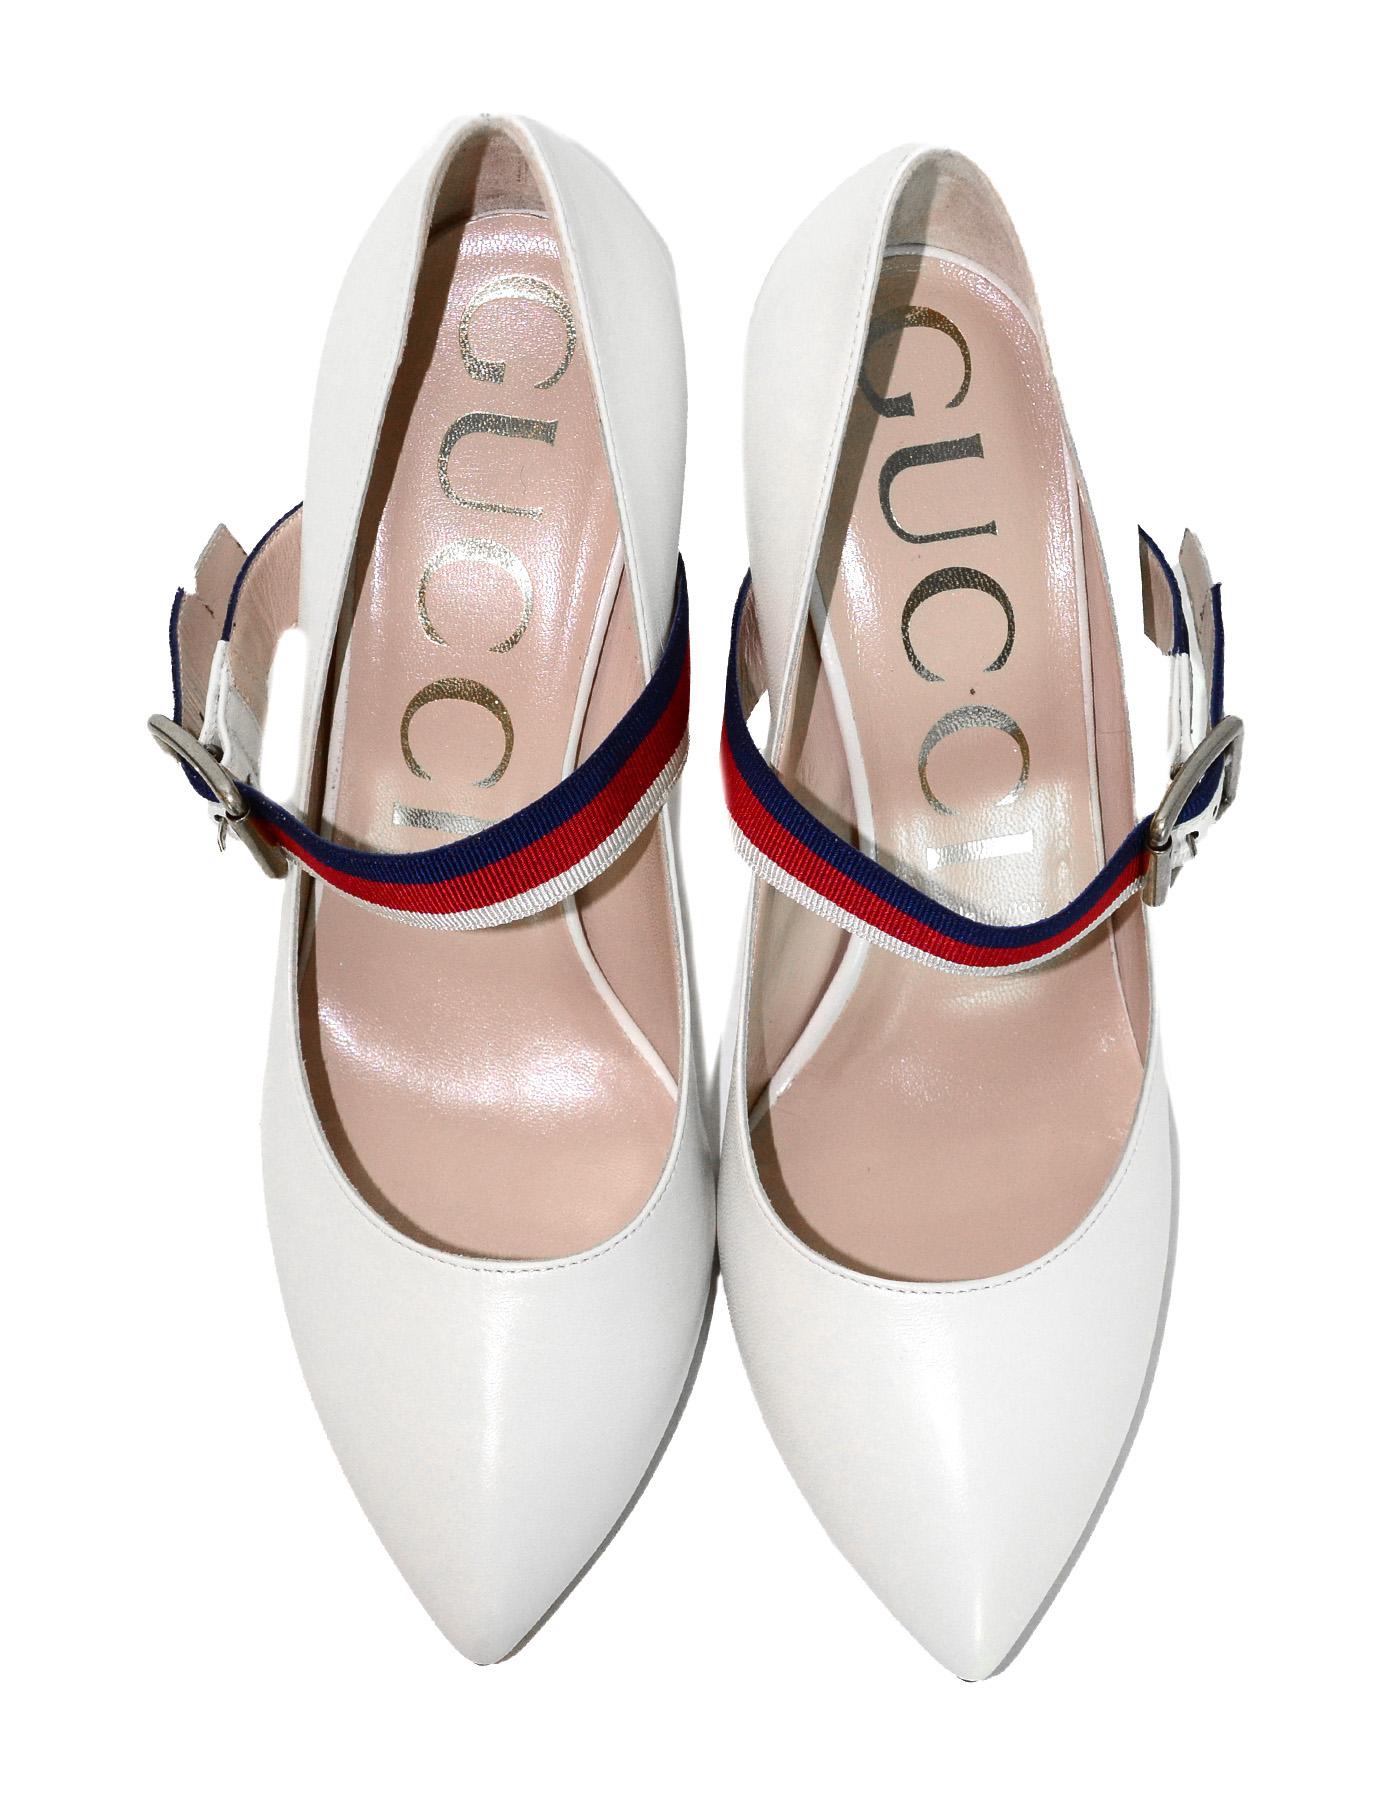 Gucci NEW White Leather Sylvie Pumps w. Red/Blue Grosgrain-Trimmed Web Sz 37.5 2